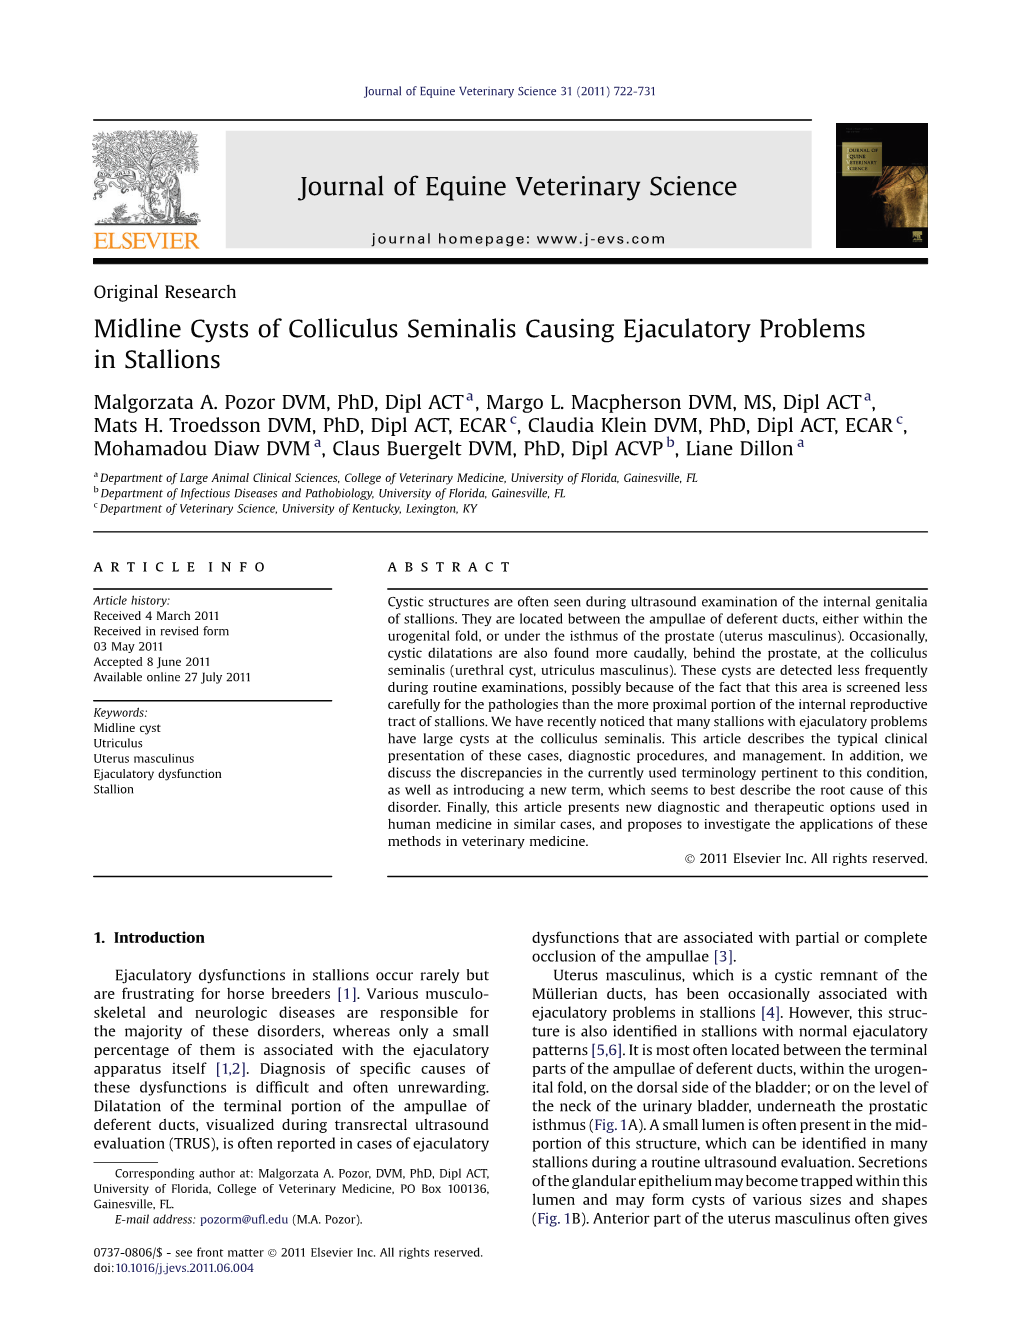 Journal of Equine Veterinary Science: Midline Cysts of Colliculus